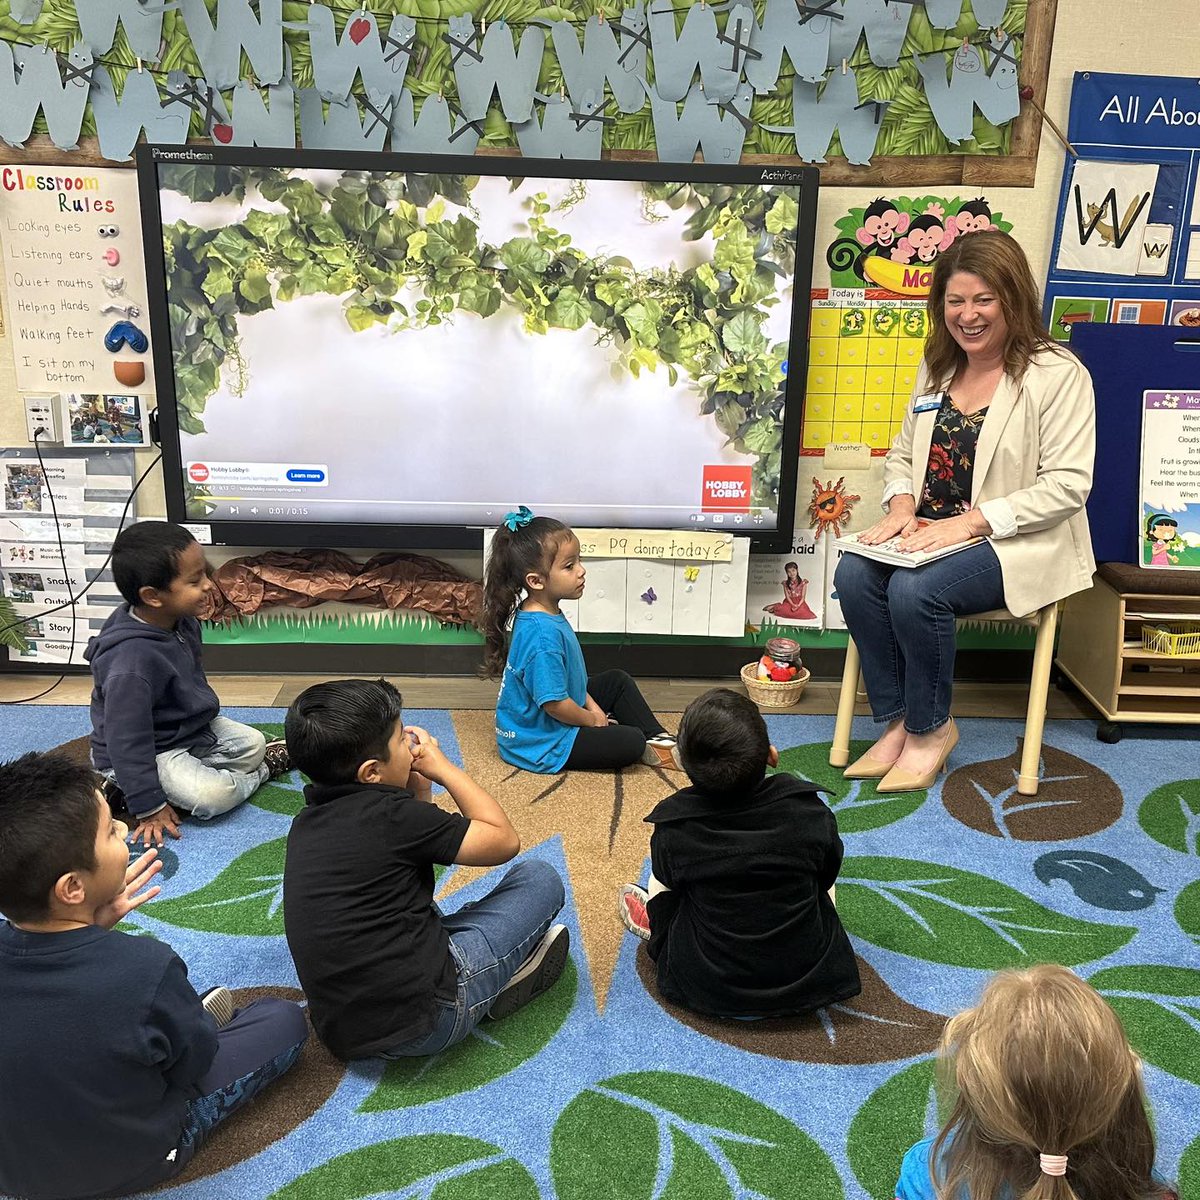 Thank you to all of the VCLA alumni who took part in the @First5Ventura #Take5VC program, which encourages us to read, talk, and sing to the children in our lives. #OneWeekAgo #LatePost